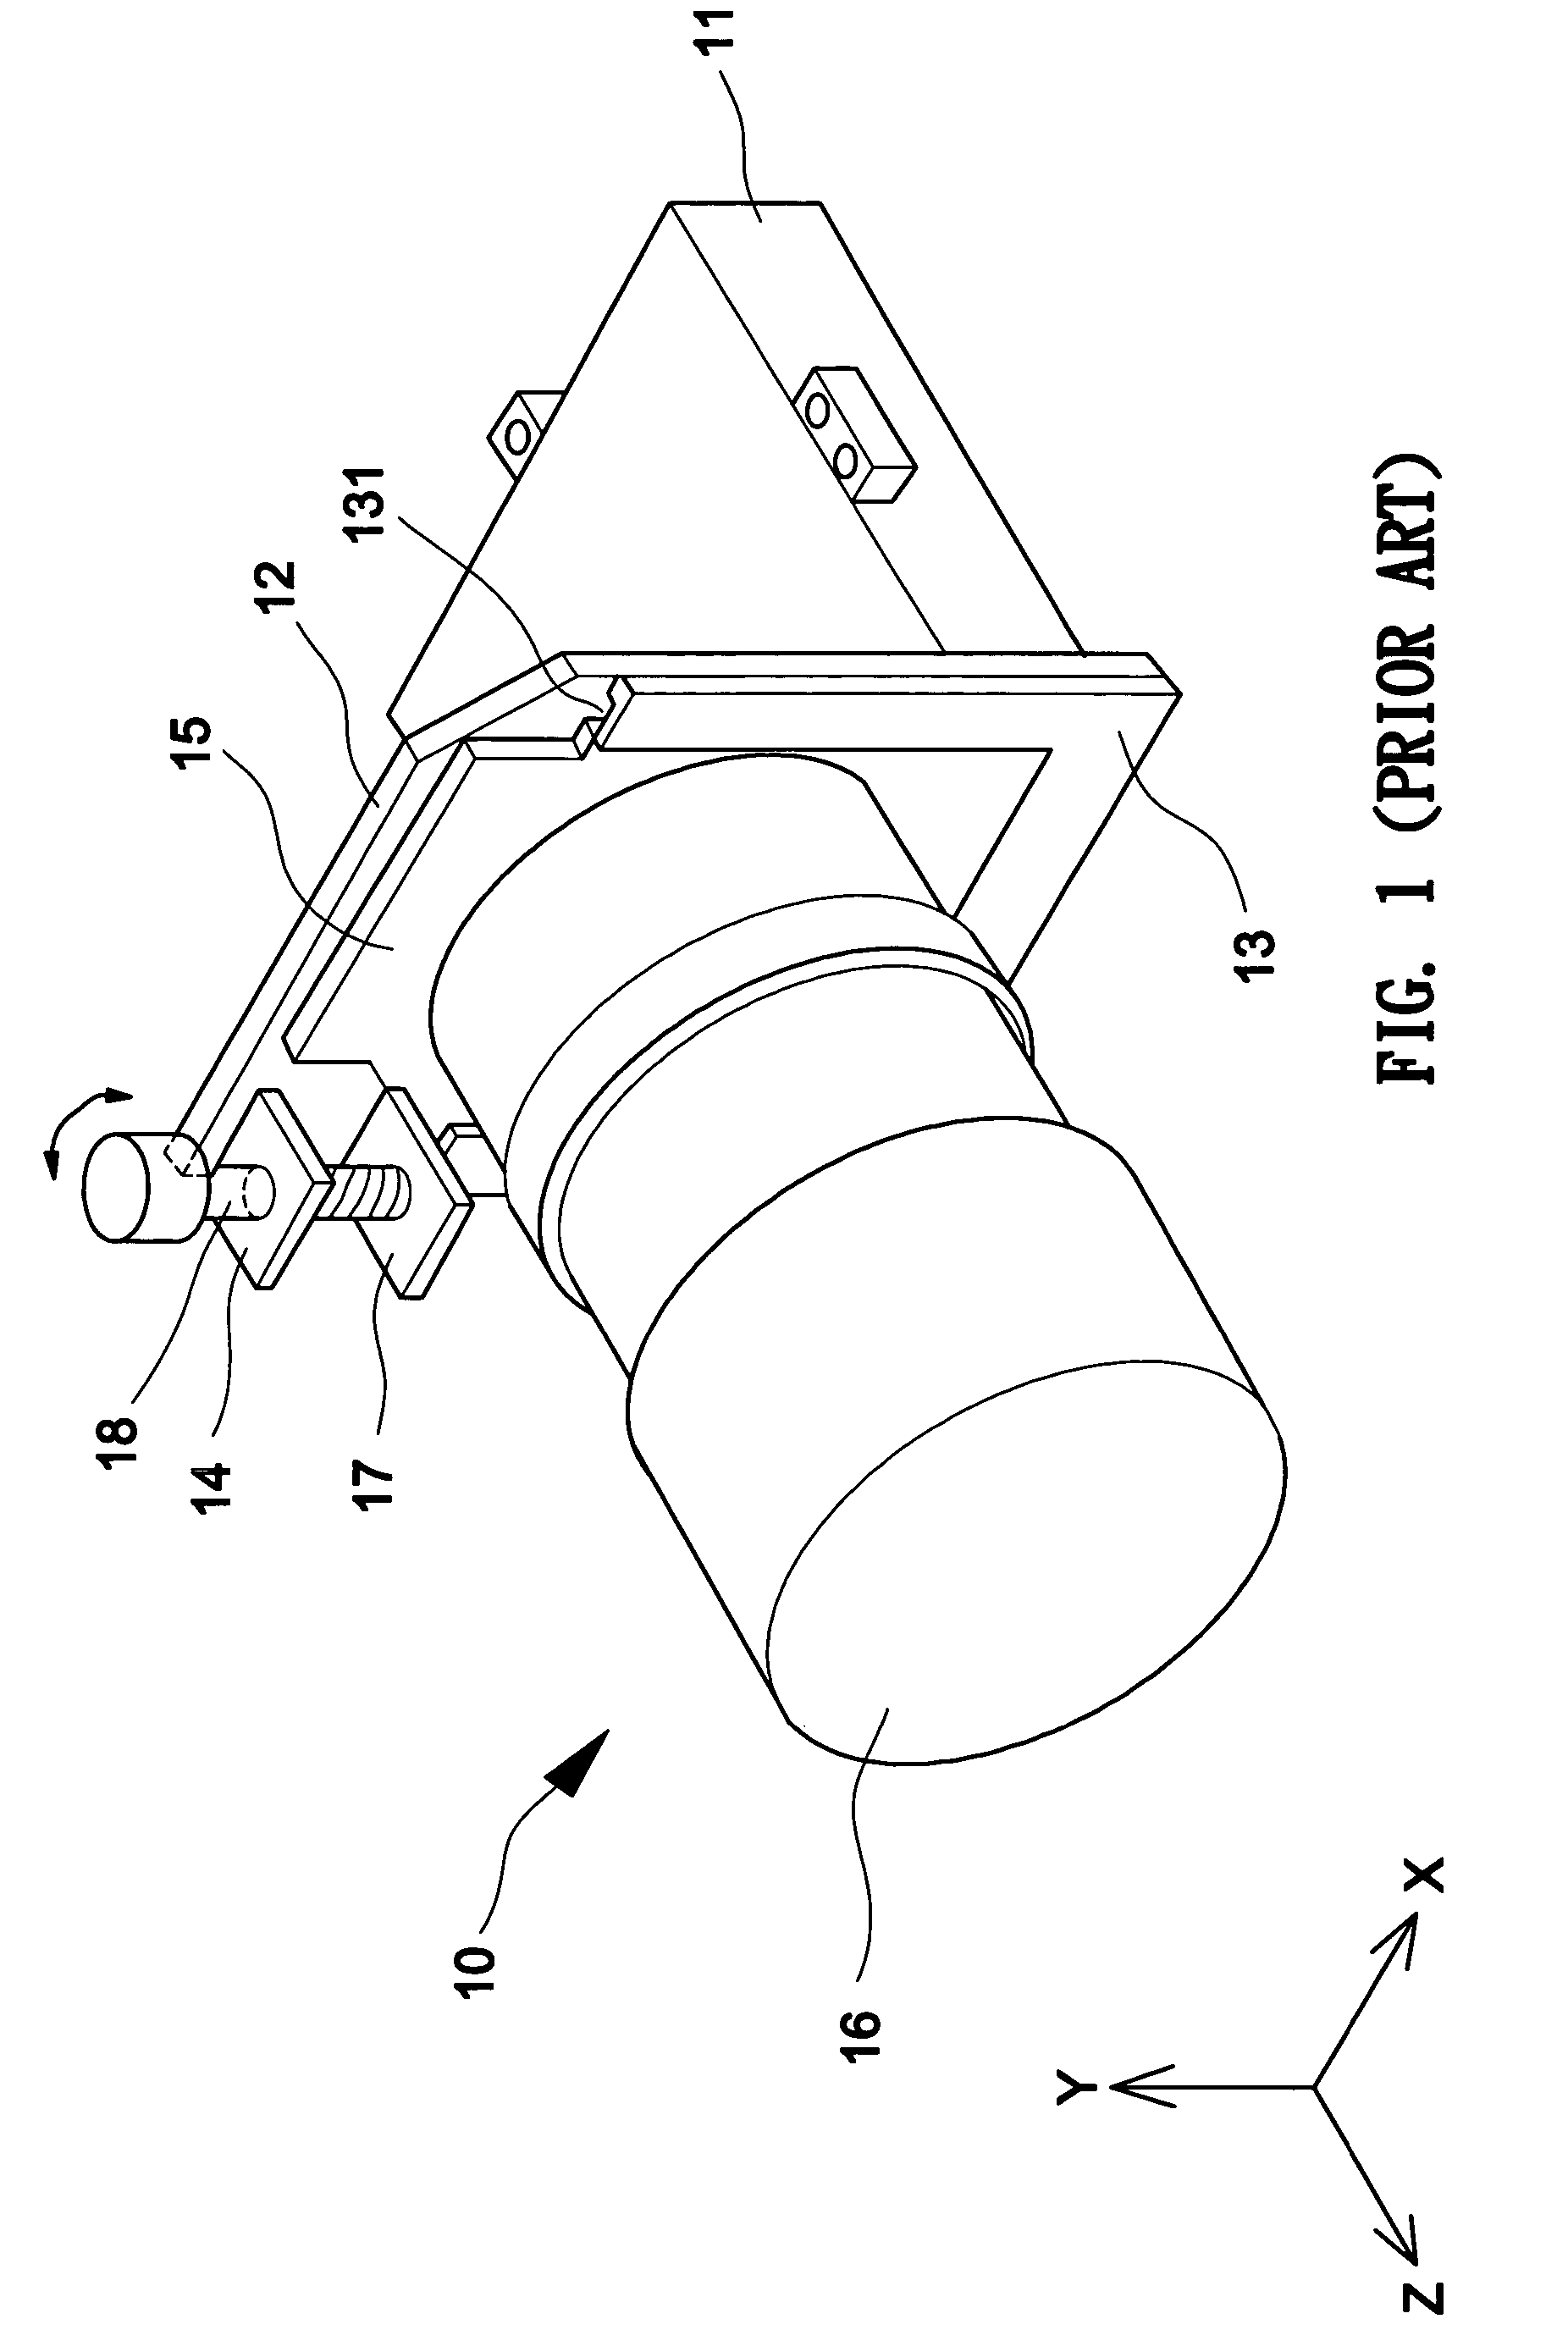 Projection lens movement-adjusting apparatus